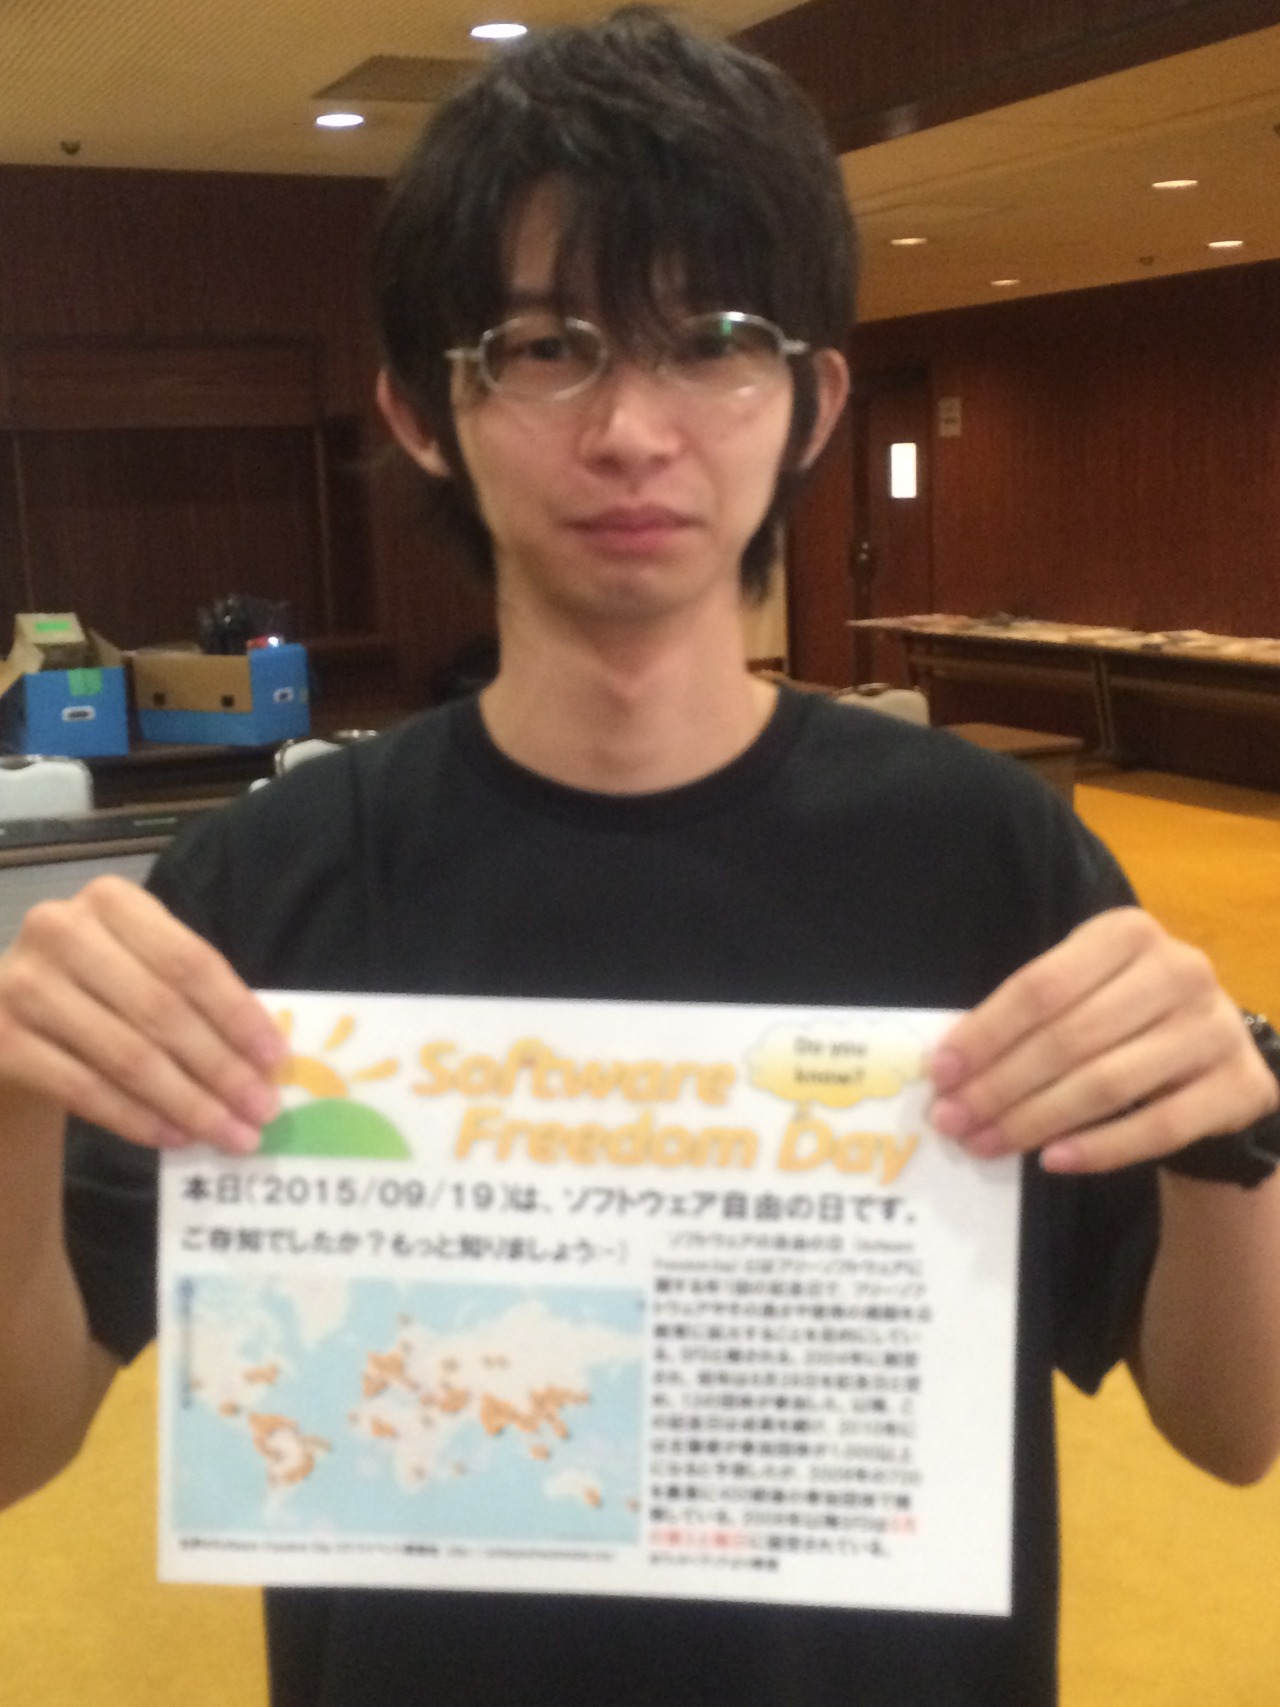 alt text=Open Source Conference 2015 Hiroshima